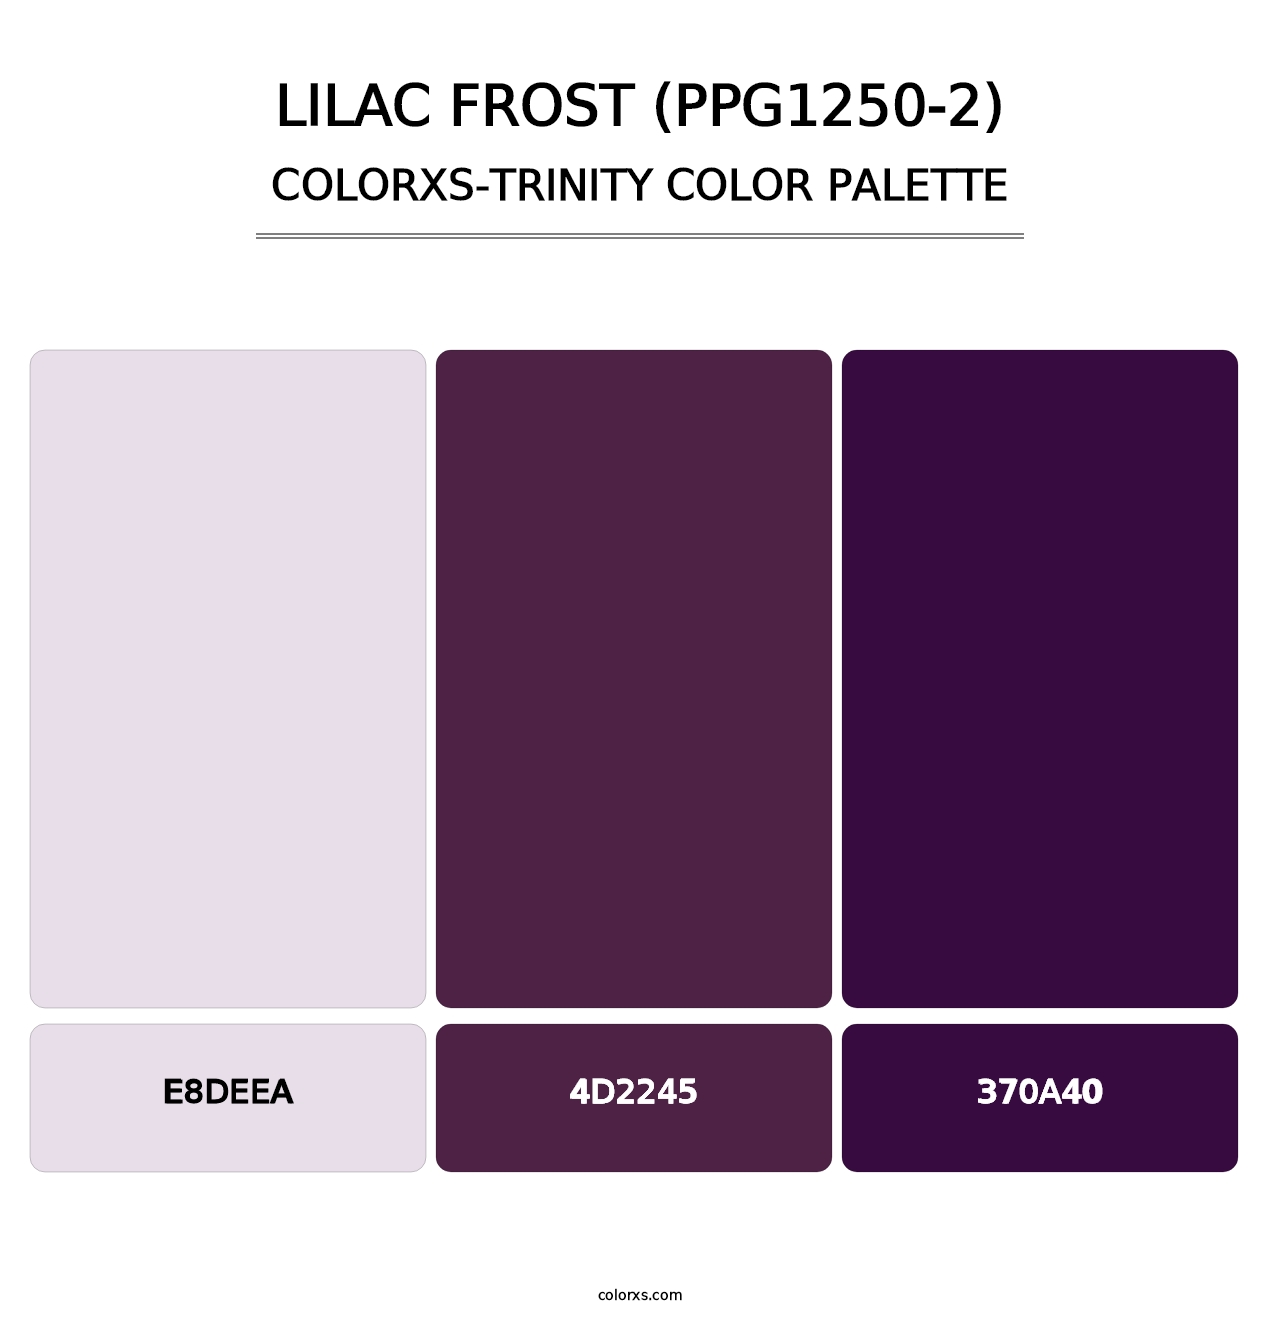 Lilac Frost (PPG1250-2) - Colorxs Trinity Palette